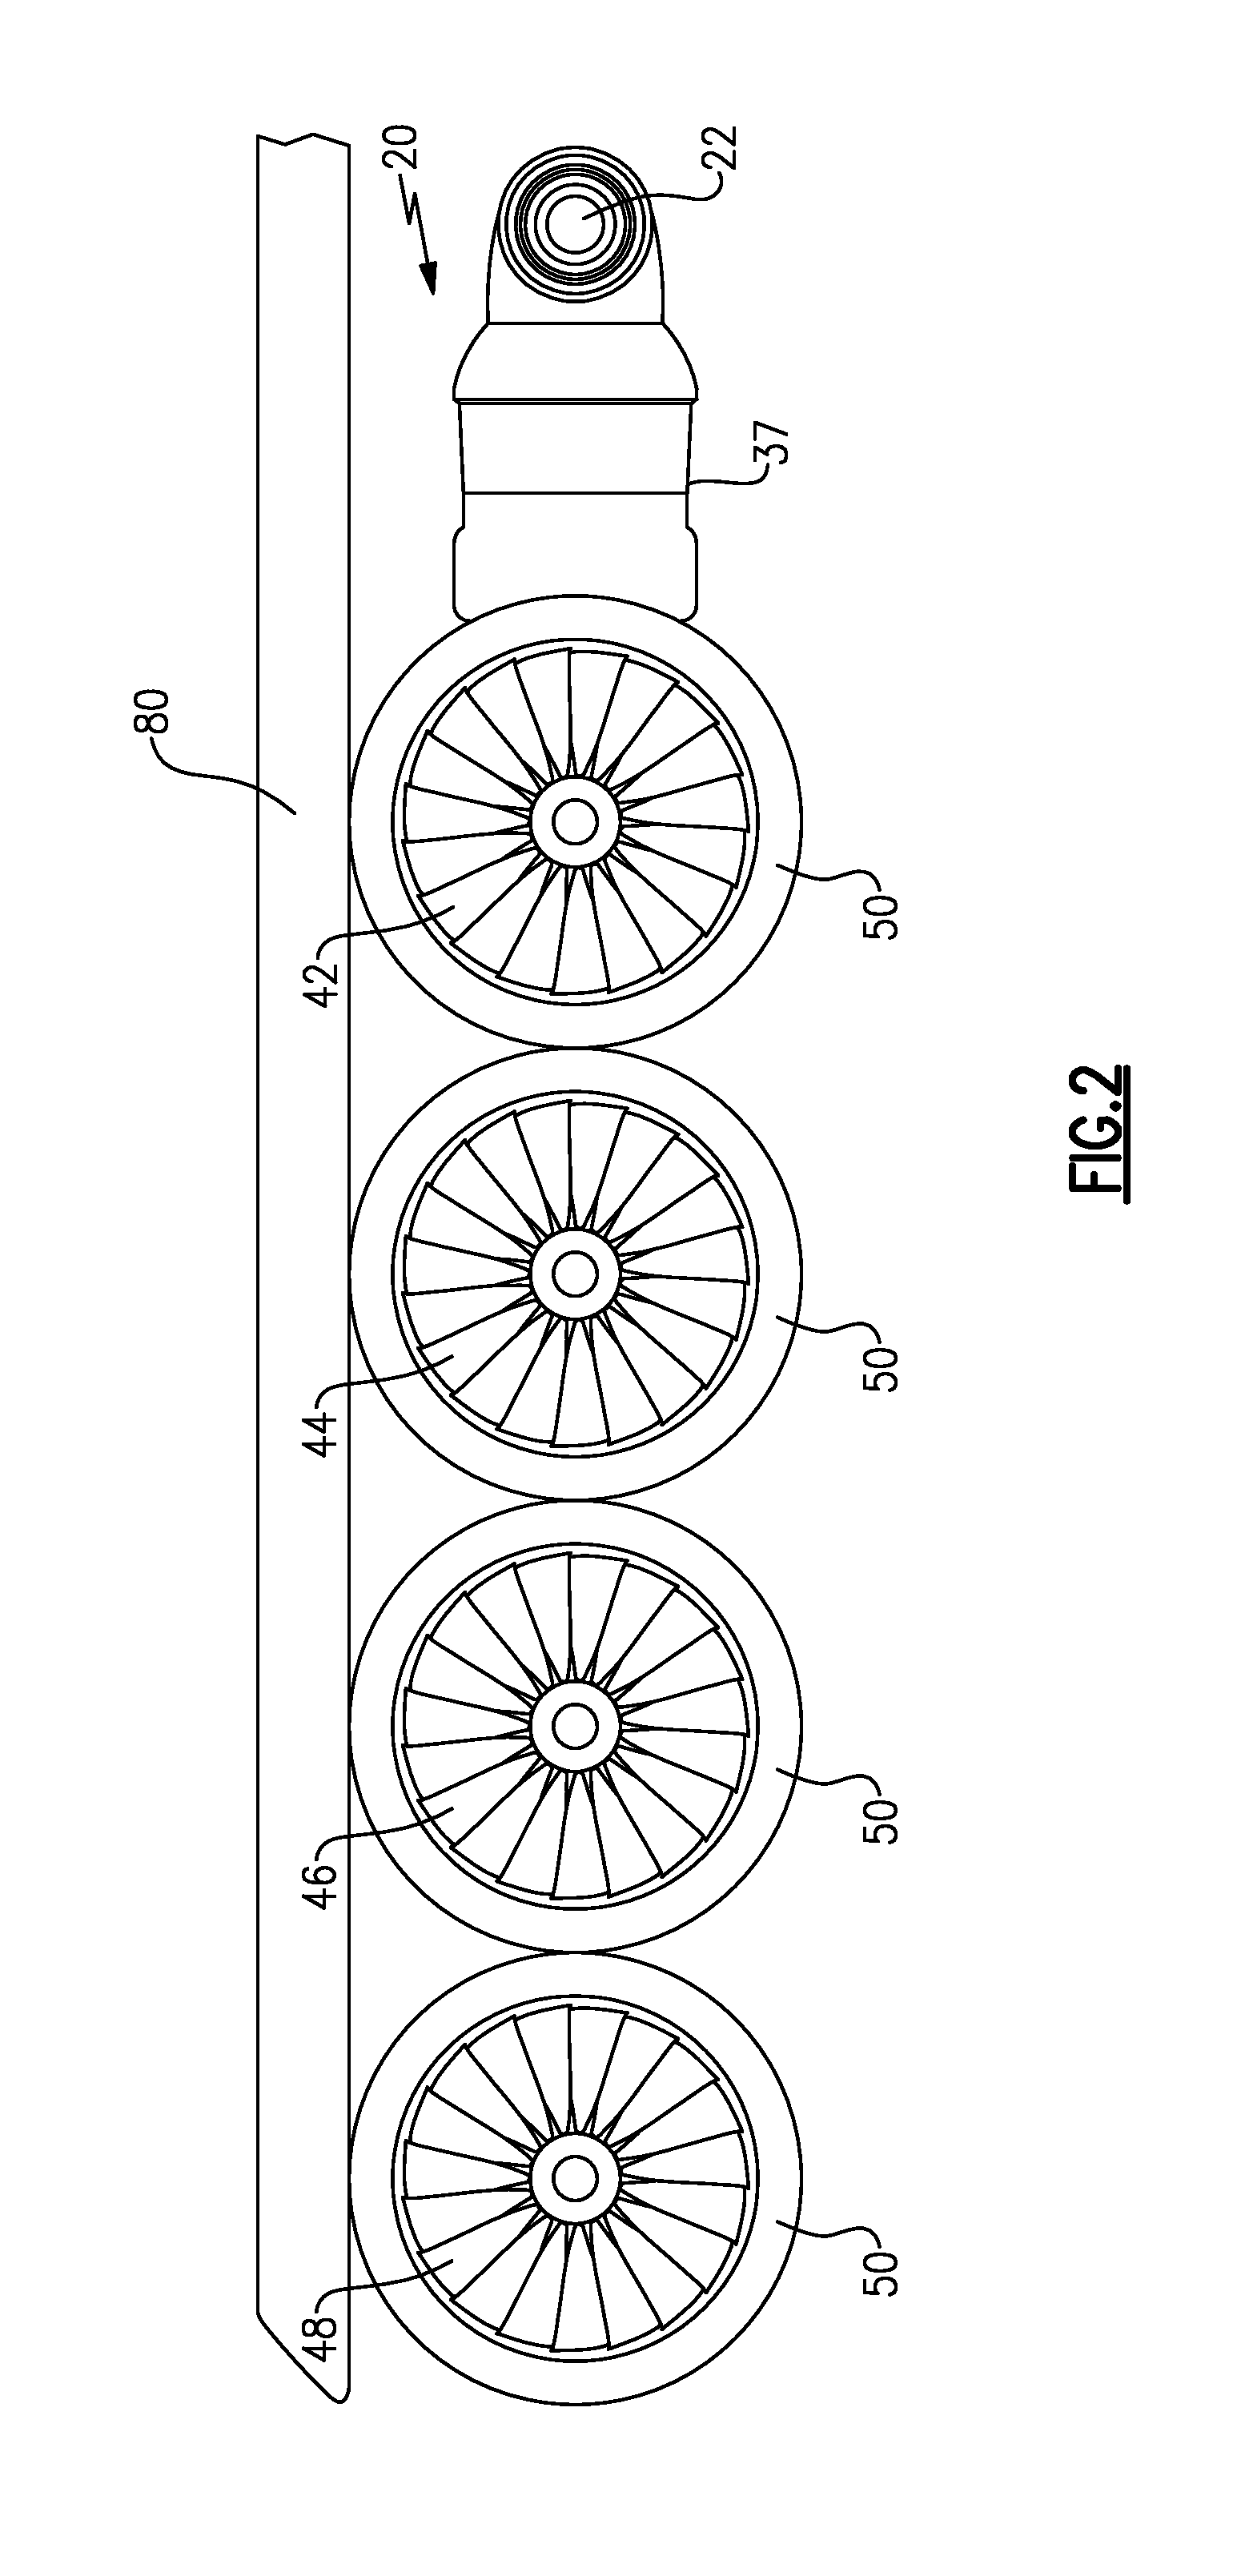 Gas turbine engine with distributed fans